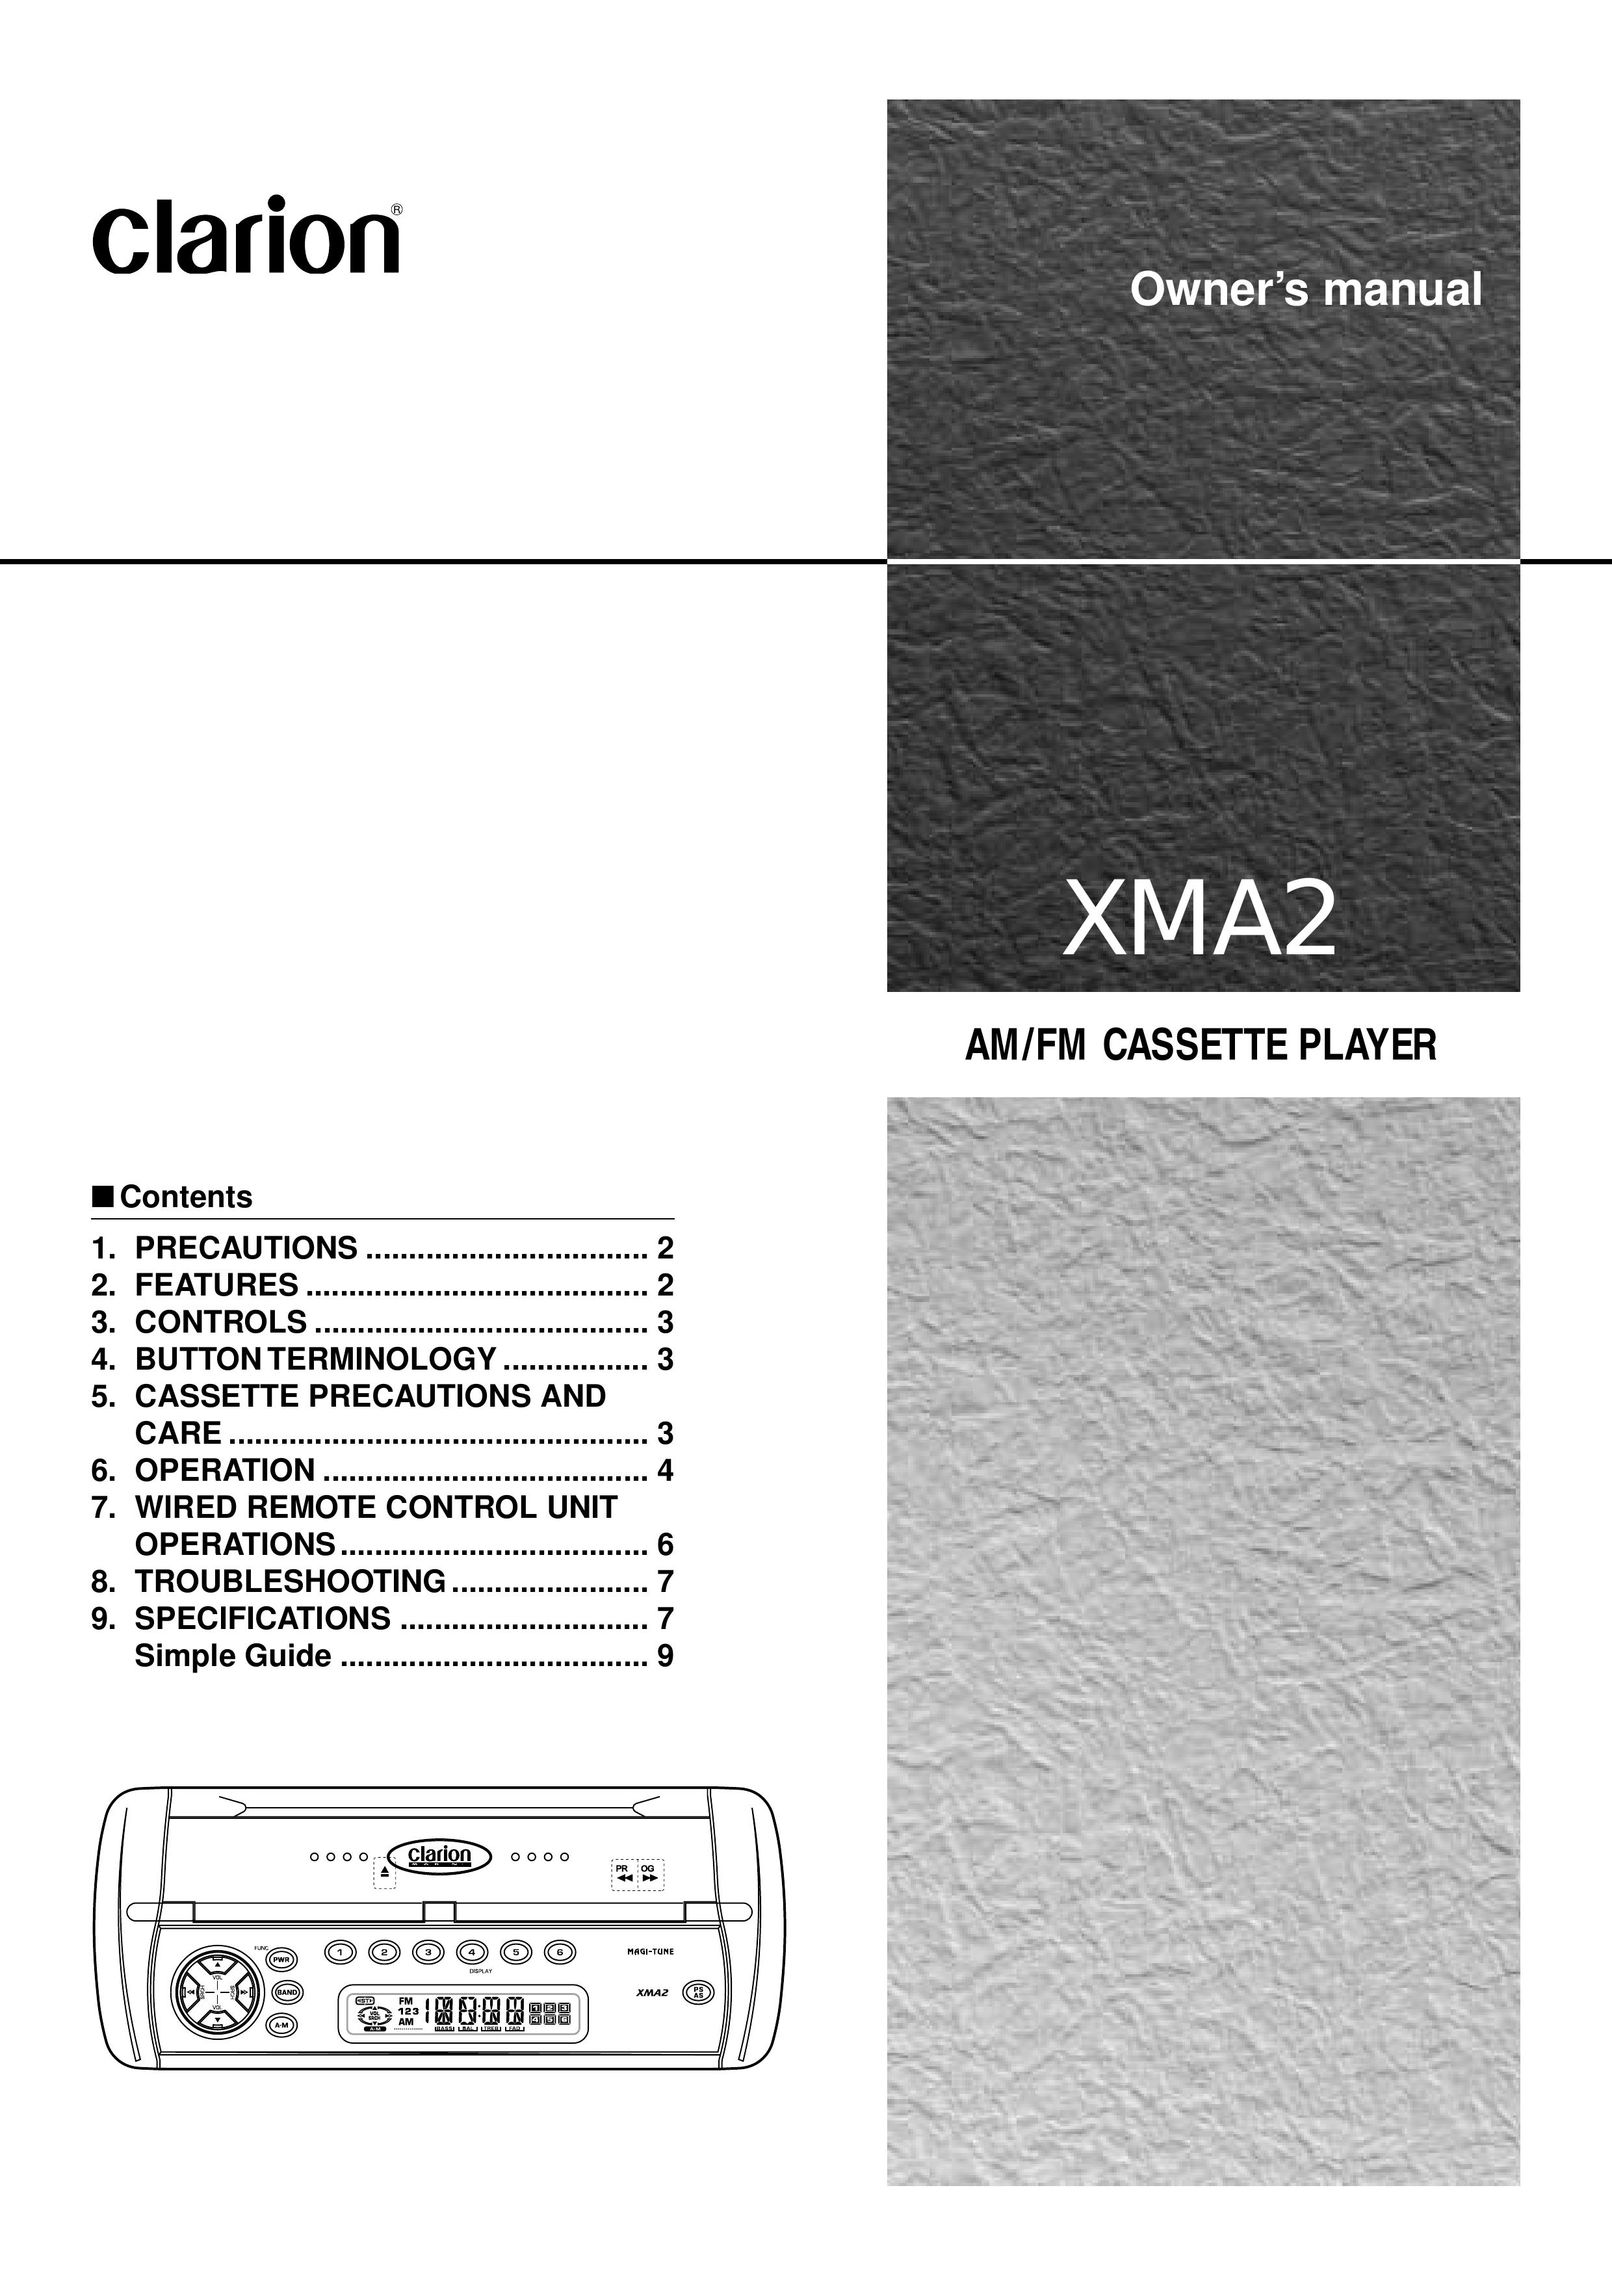 Clarion XMA2 Cassette Player User Manual